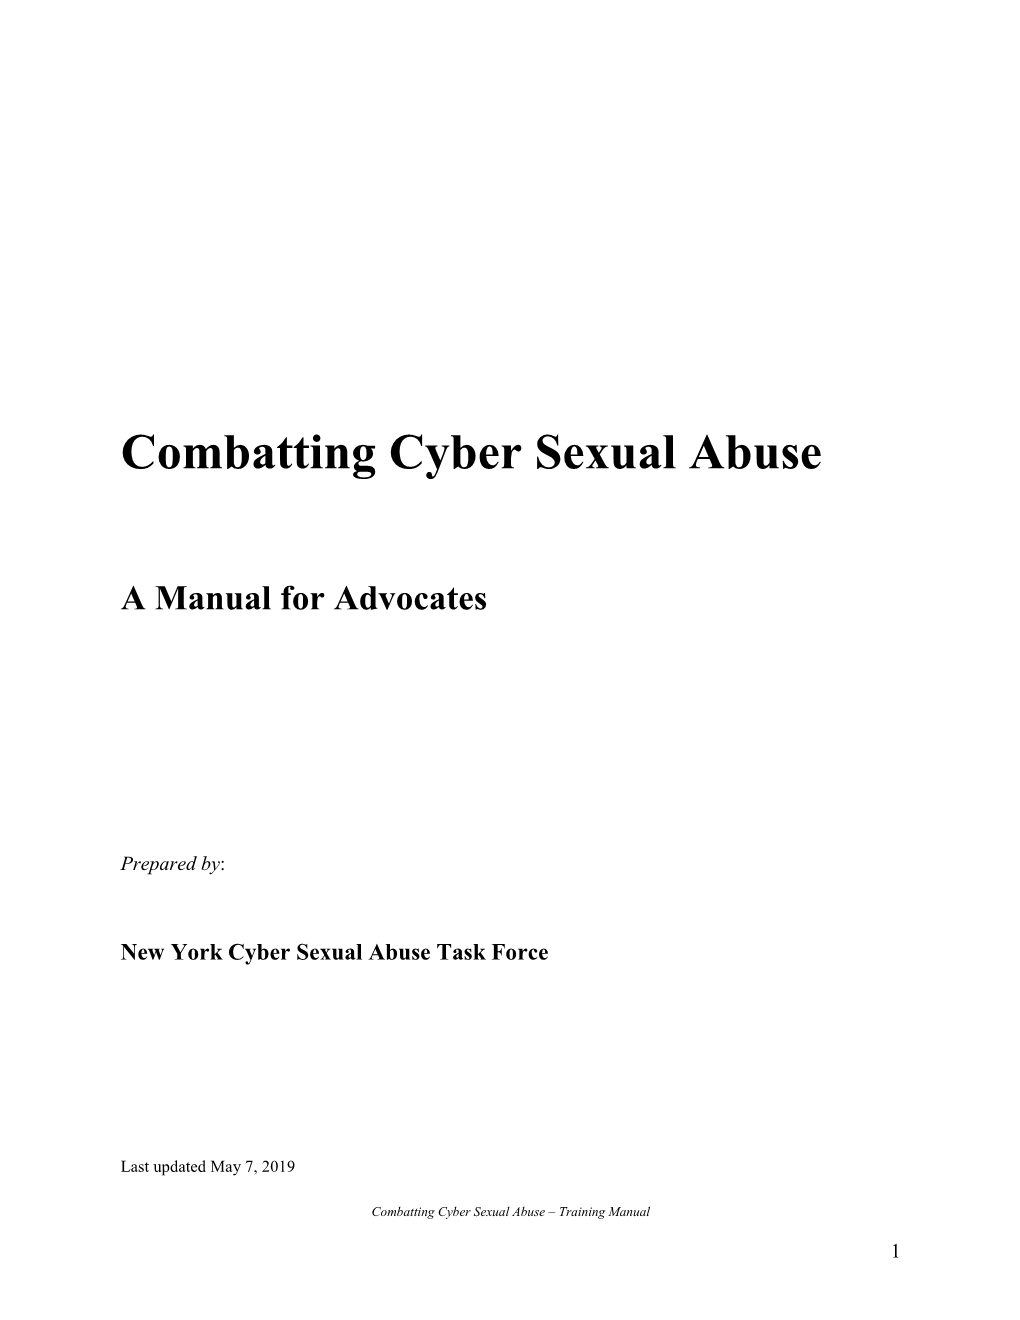 Combatting Cyber Sexual Abuse